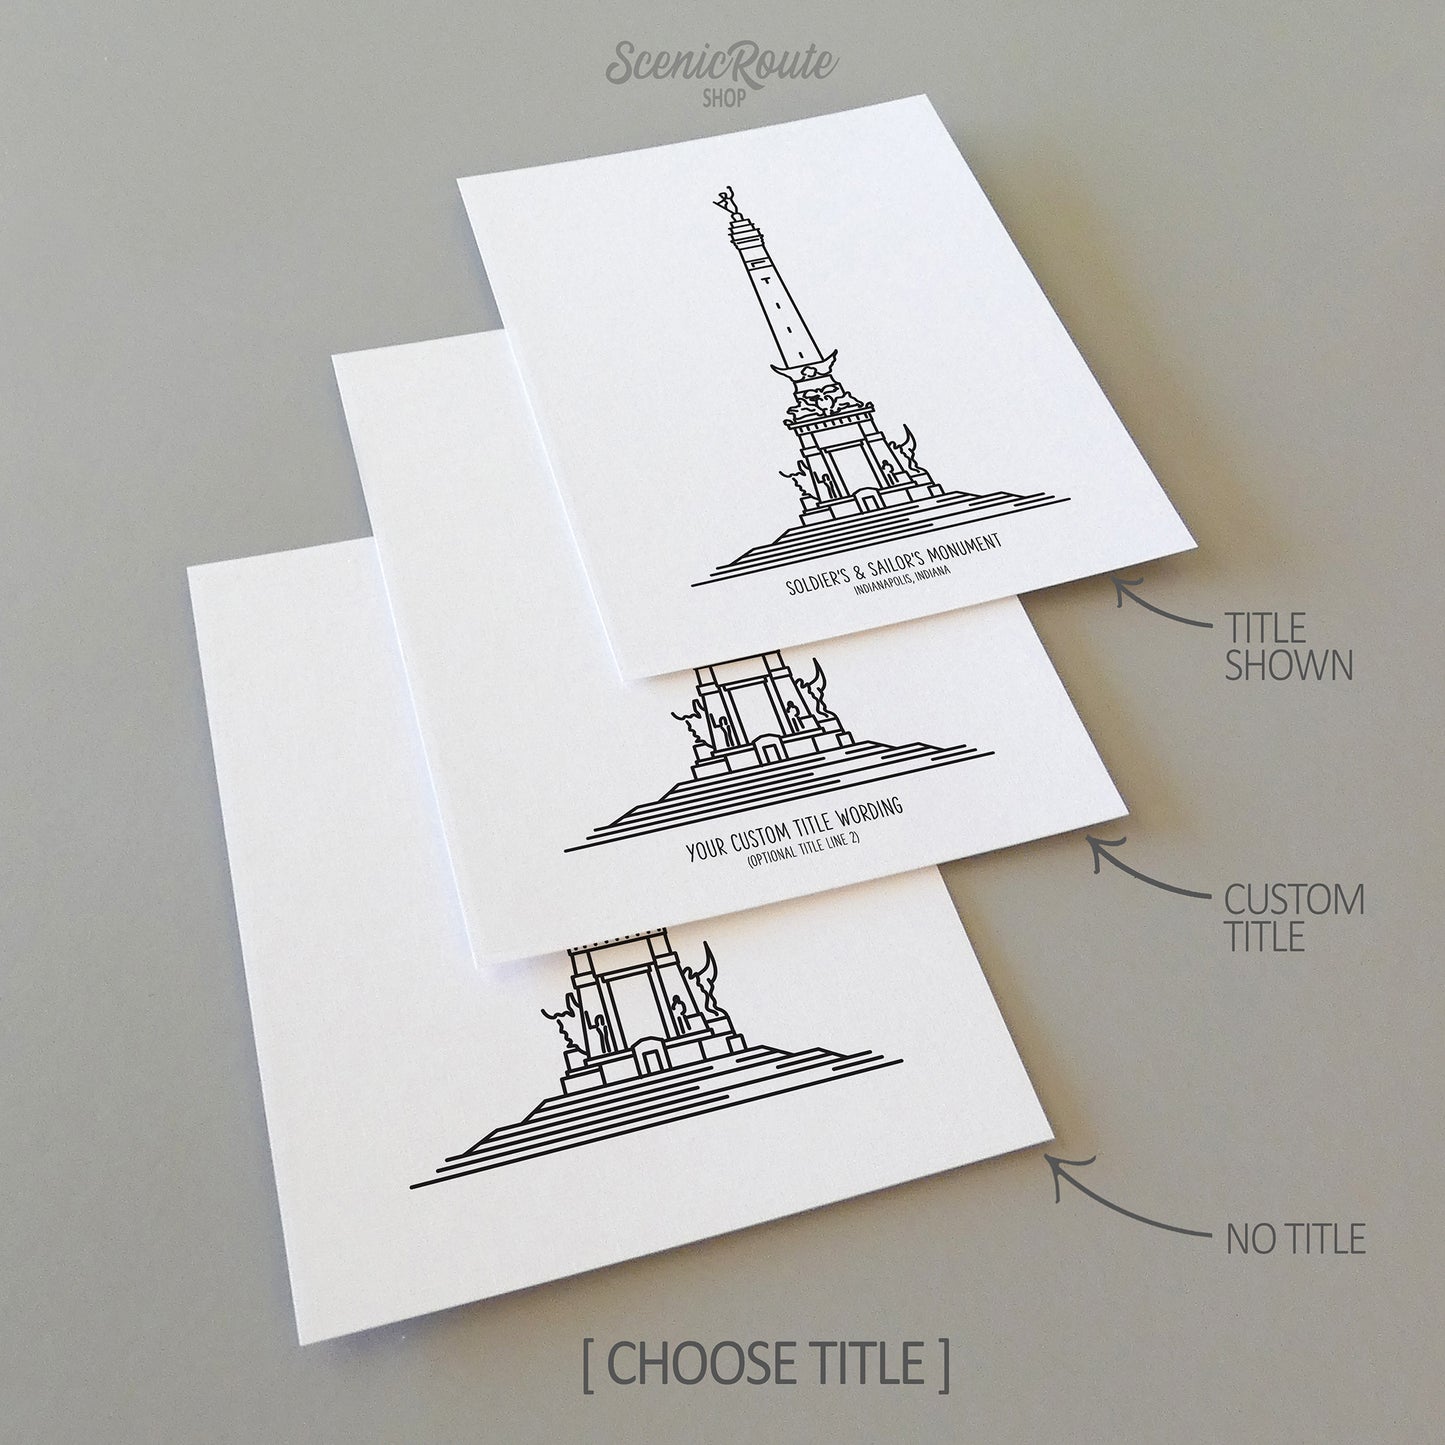 Three line art drawings of the Indianapolis Soldiers and Sailors Monument on white linen paper with a gray background.  The pieces are shown with title options that can be chosen and personalized.